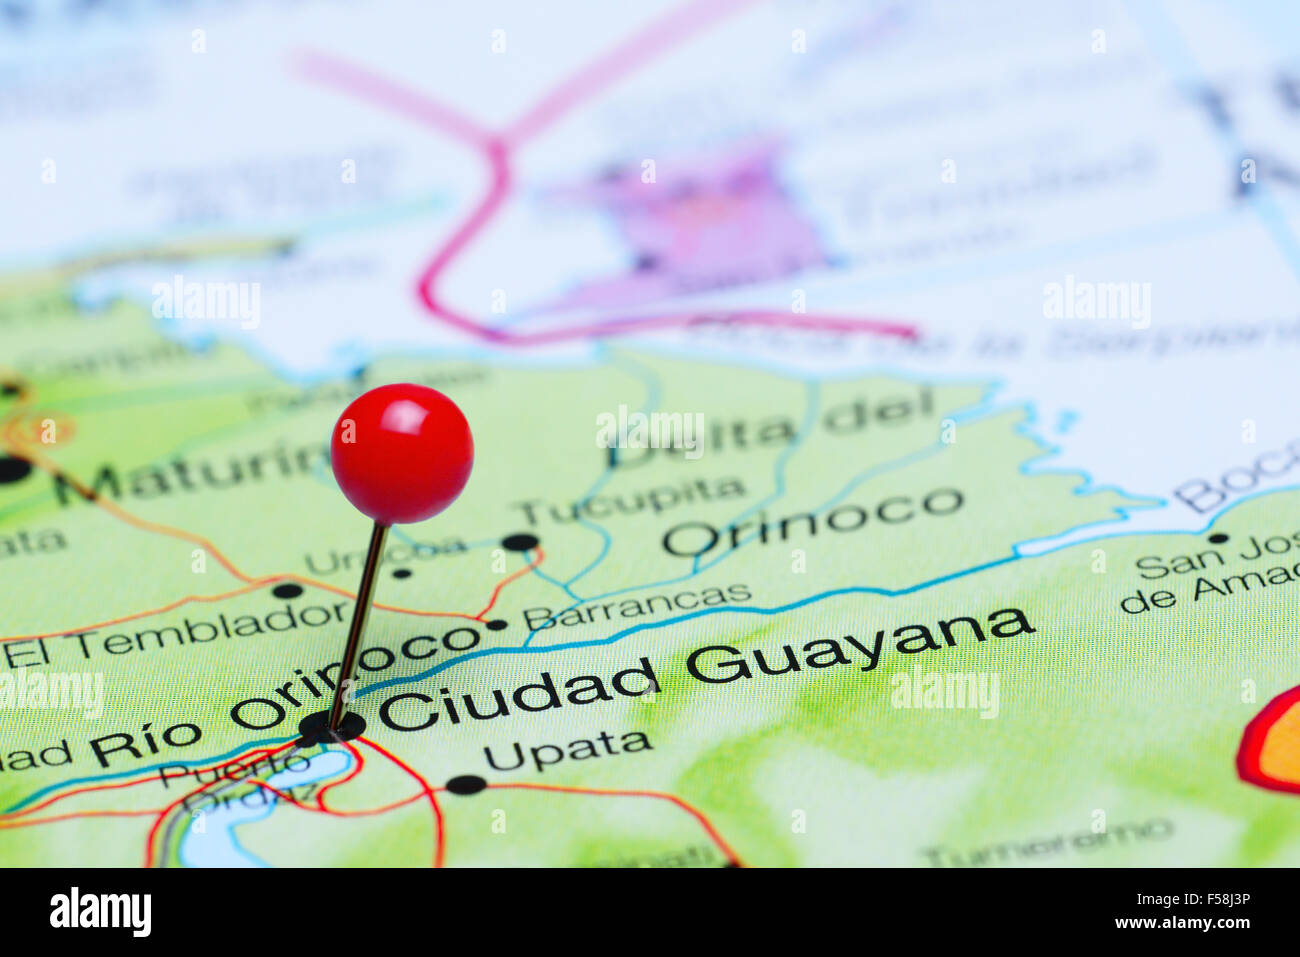 Ciudad Guayana pinned on a map of America Stock Photo